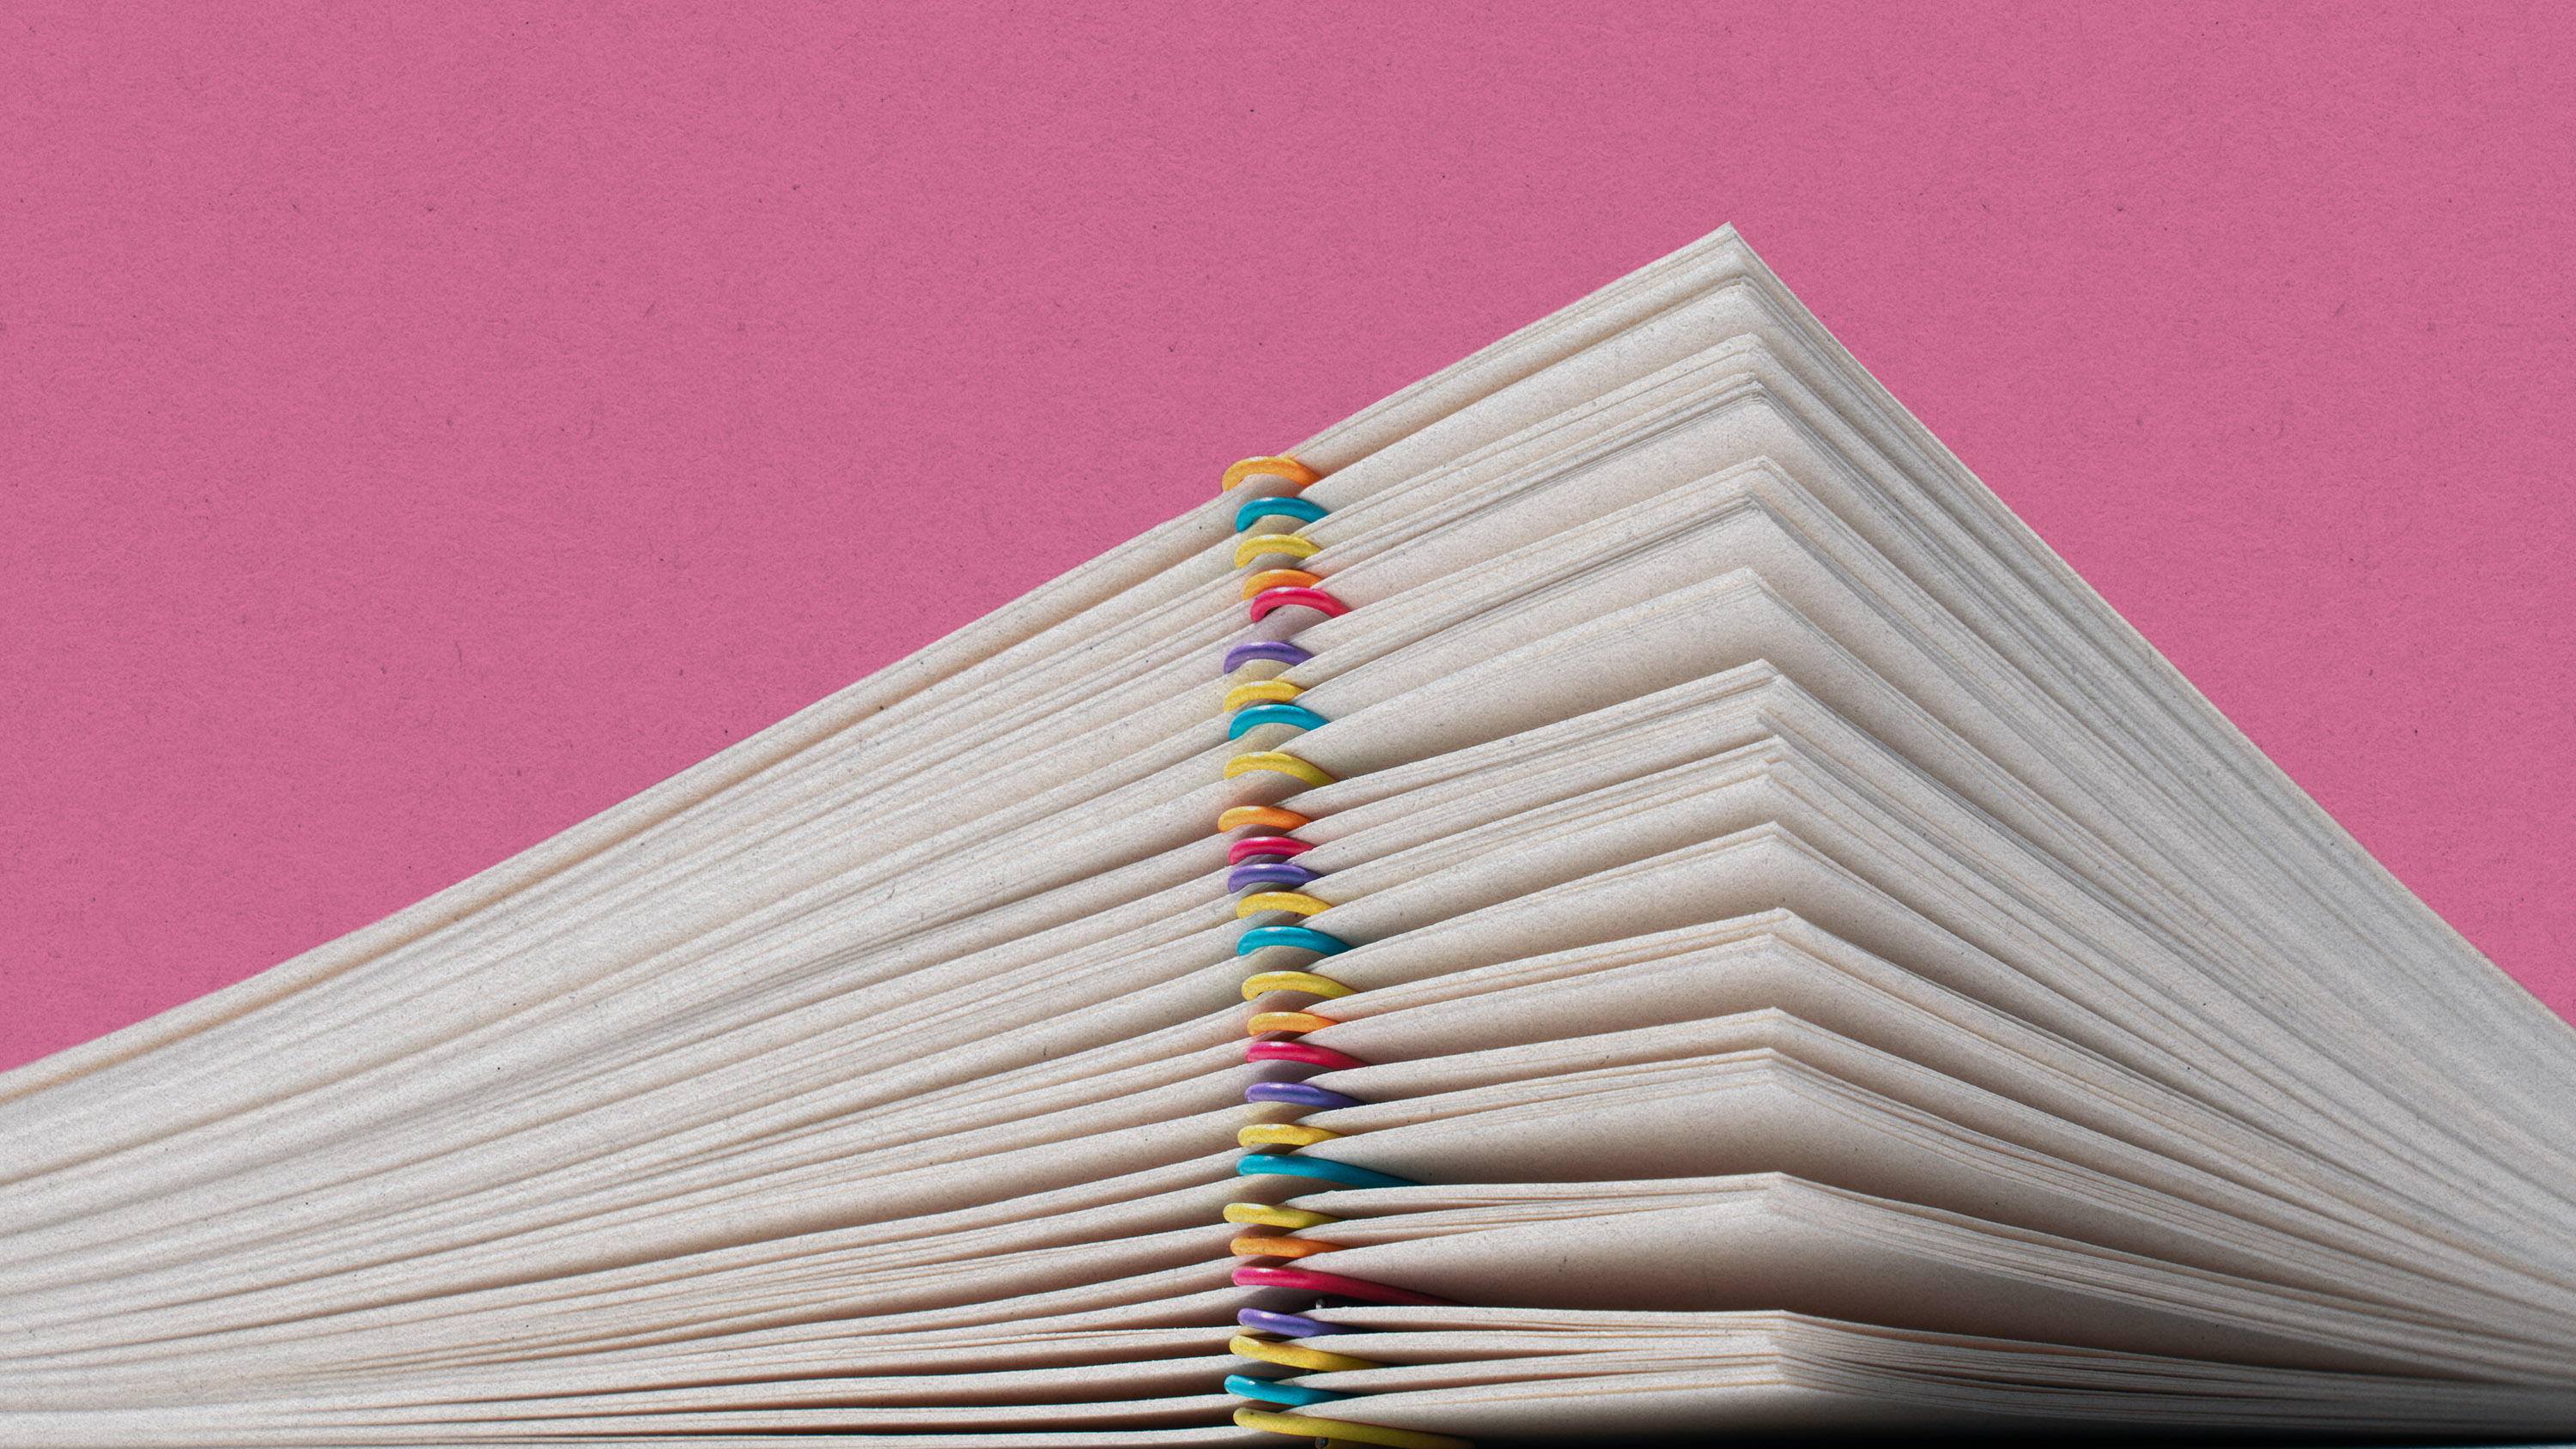 macro view of a sheaf of paper with colored paperclips forming a peak